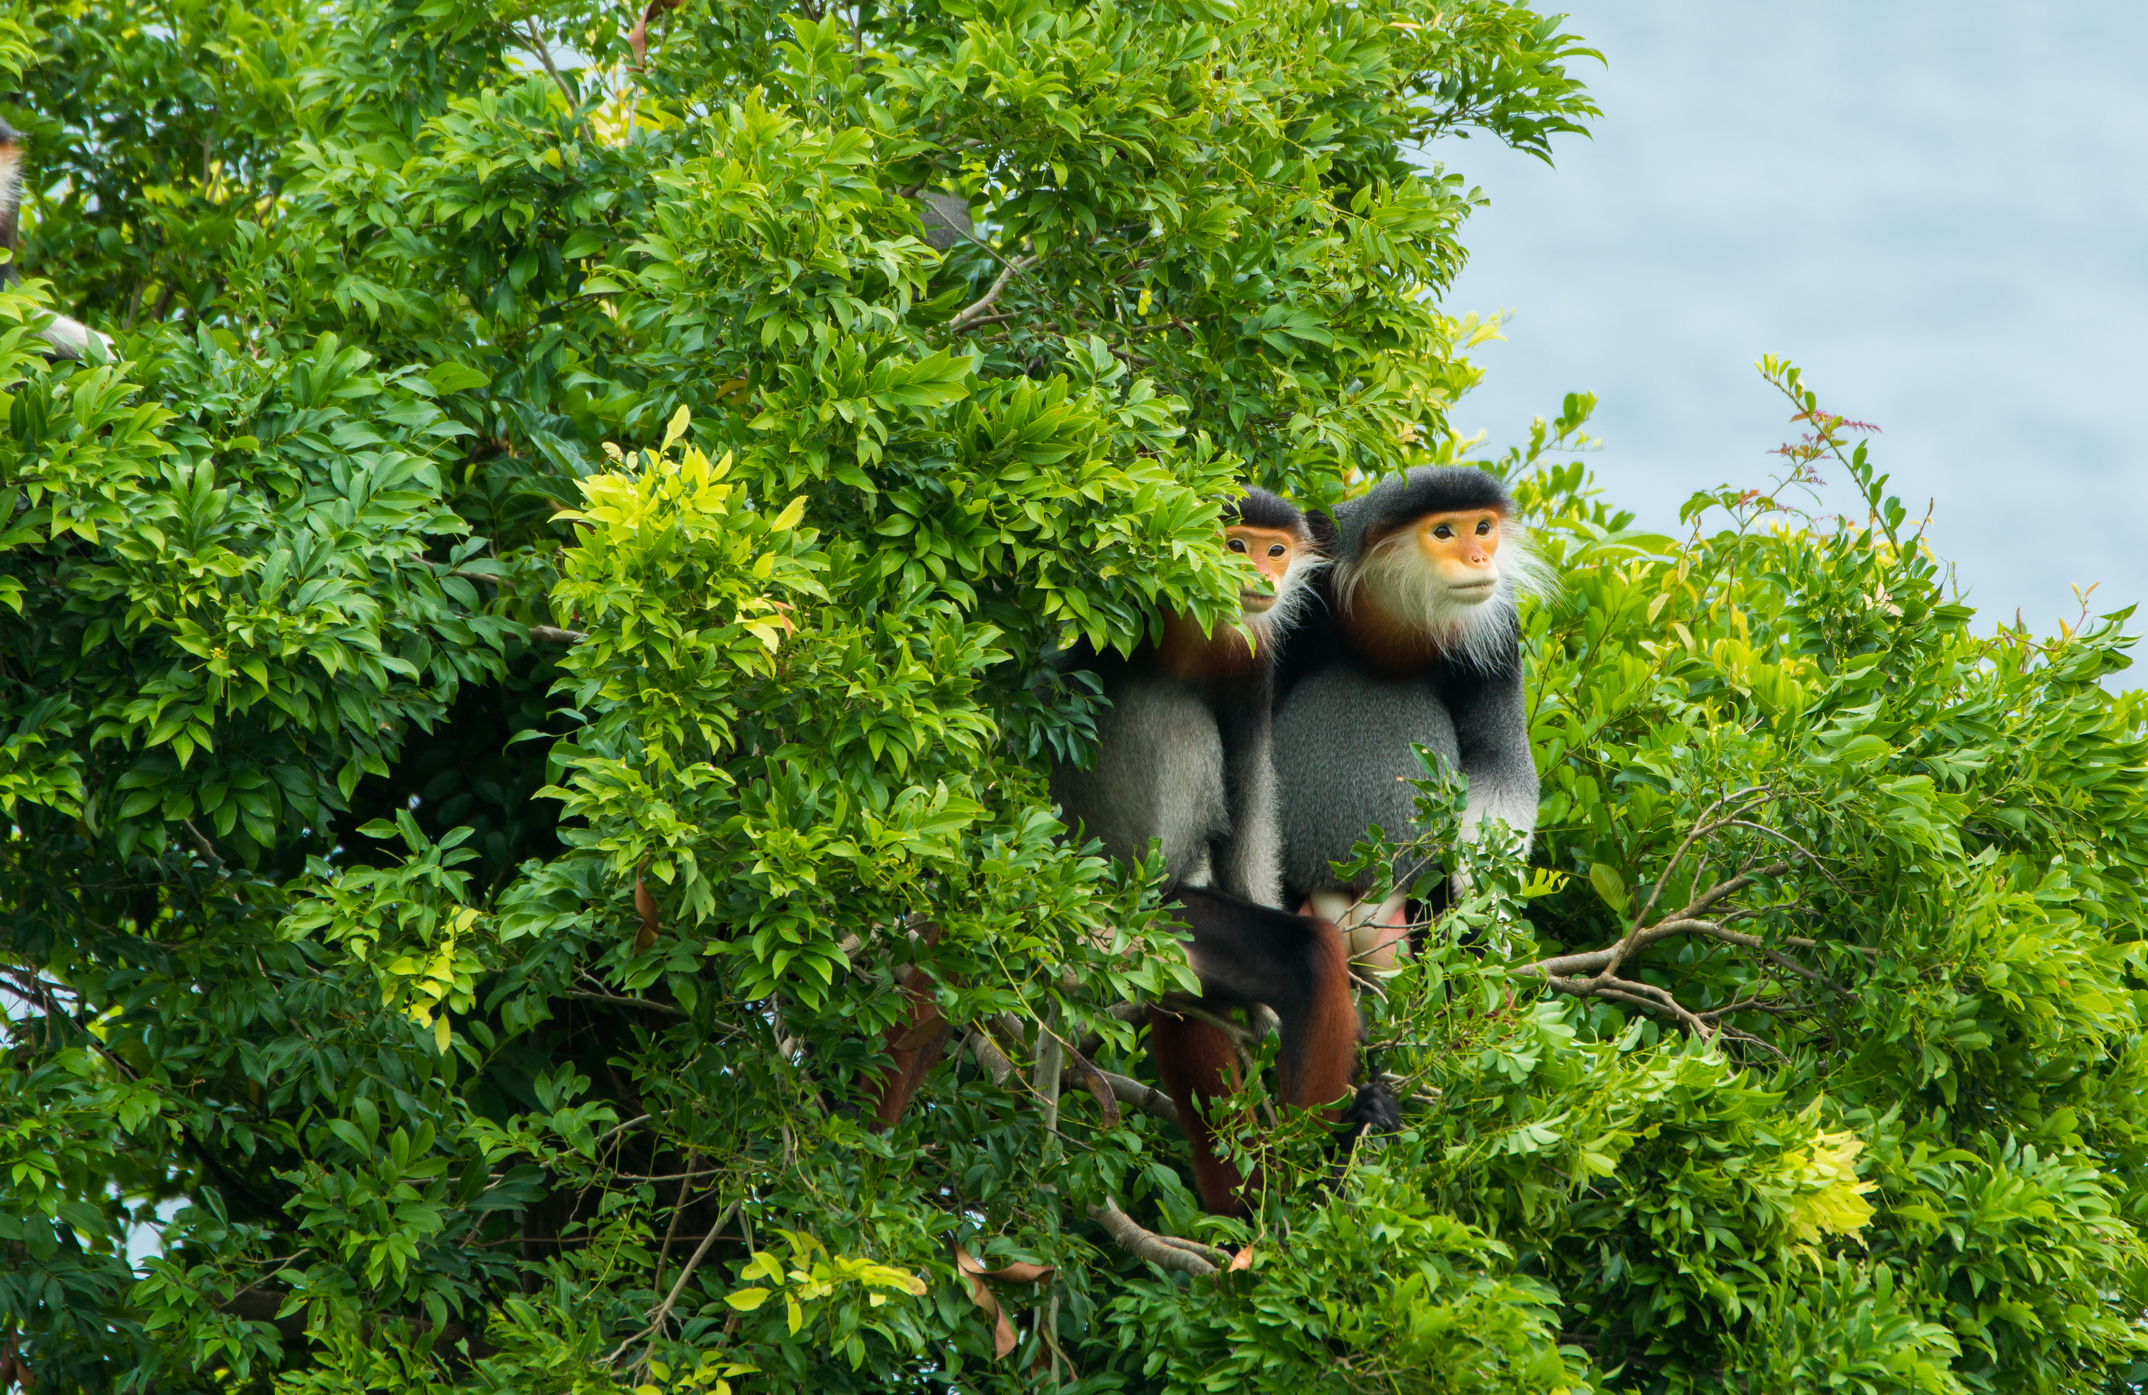 Old World monkeys at Son Tra Peninsula, Vietnam. (Getty Images)